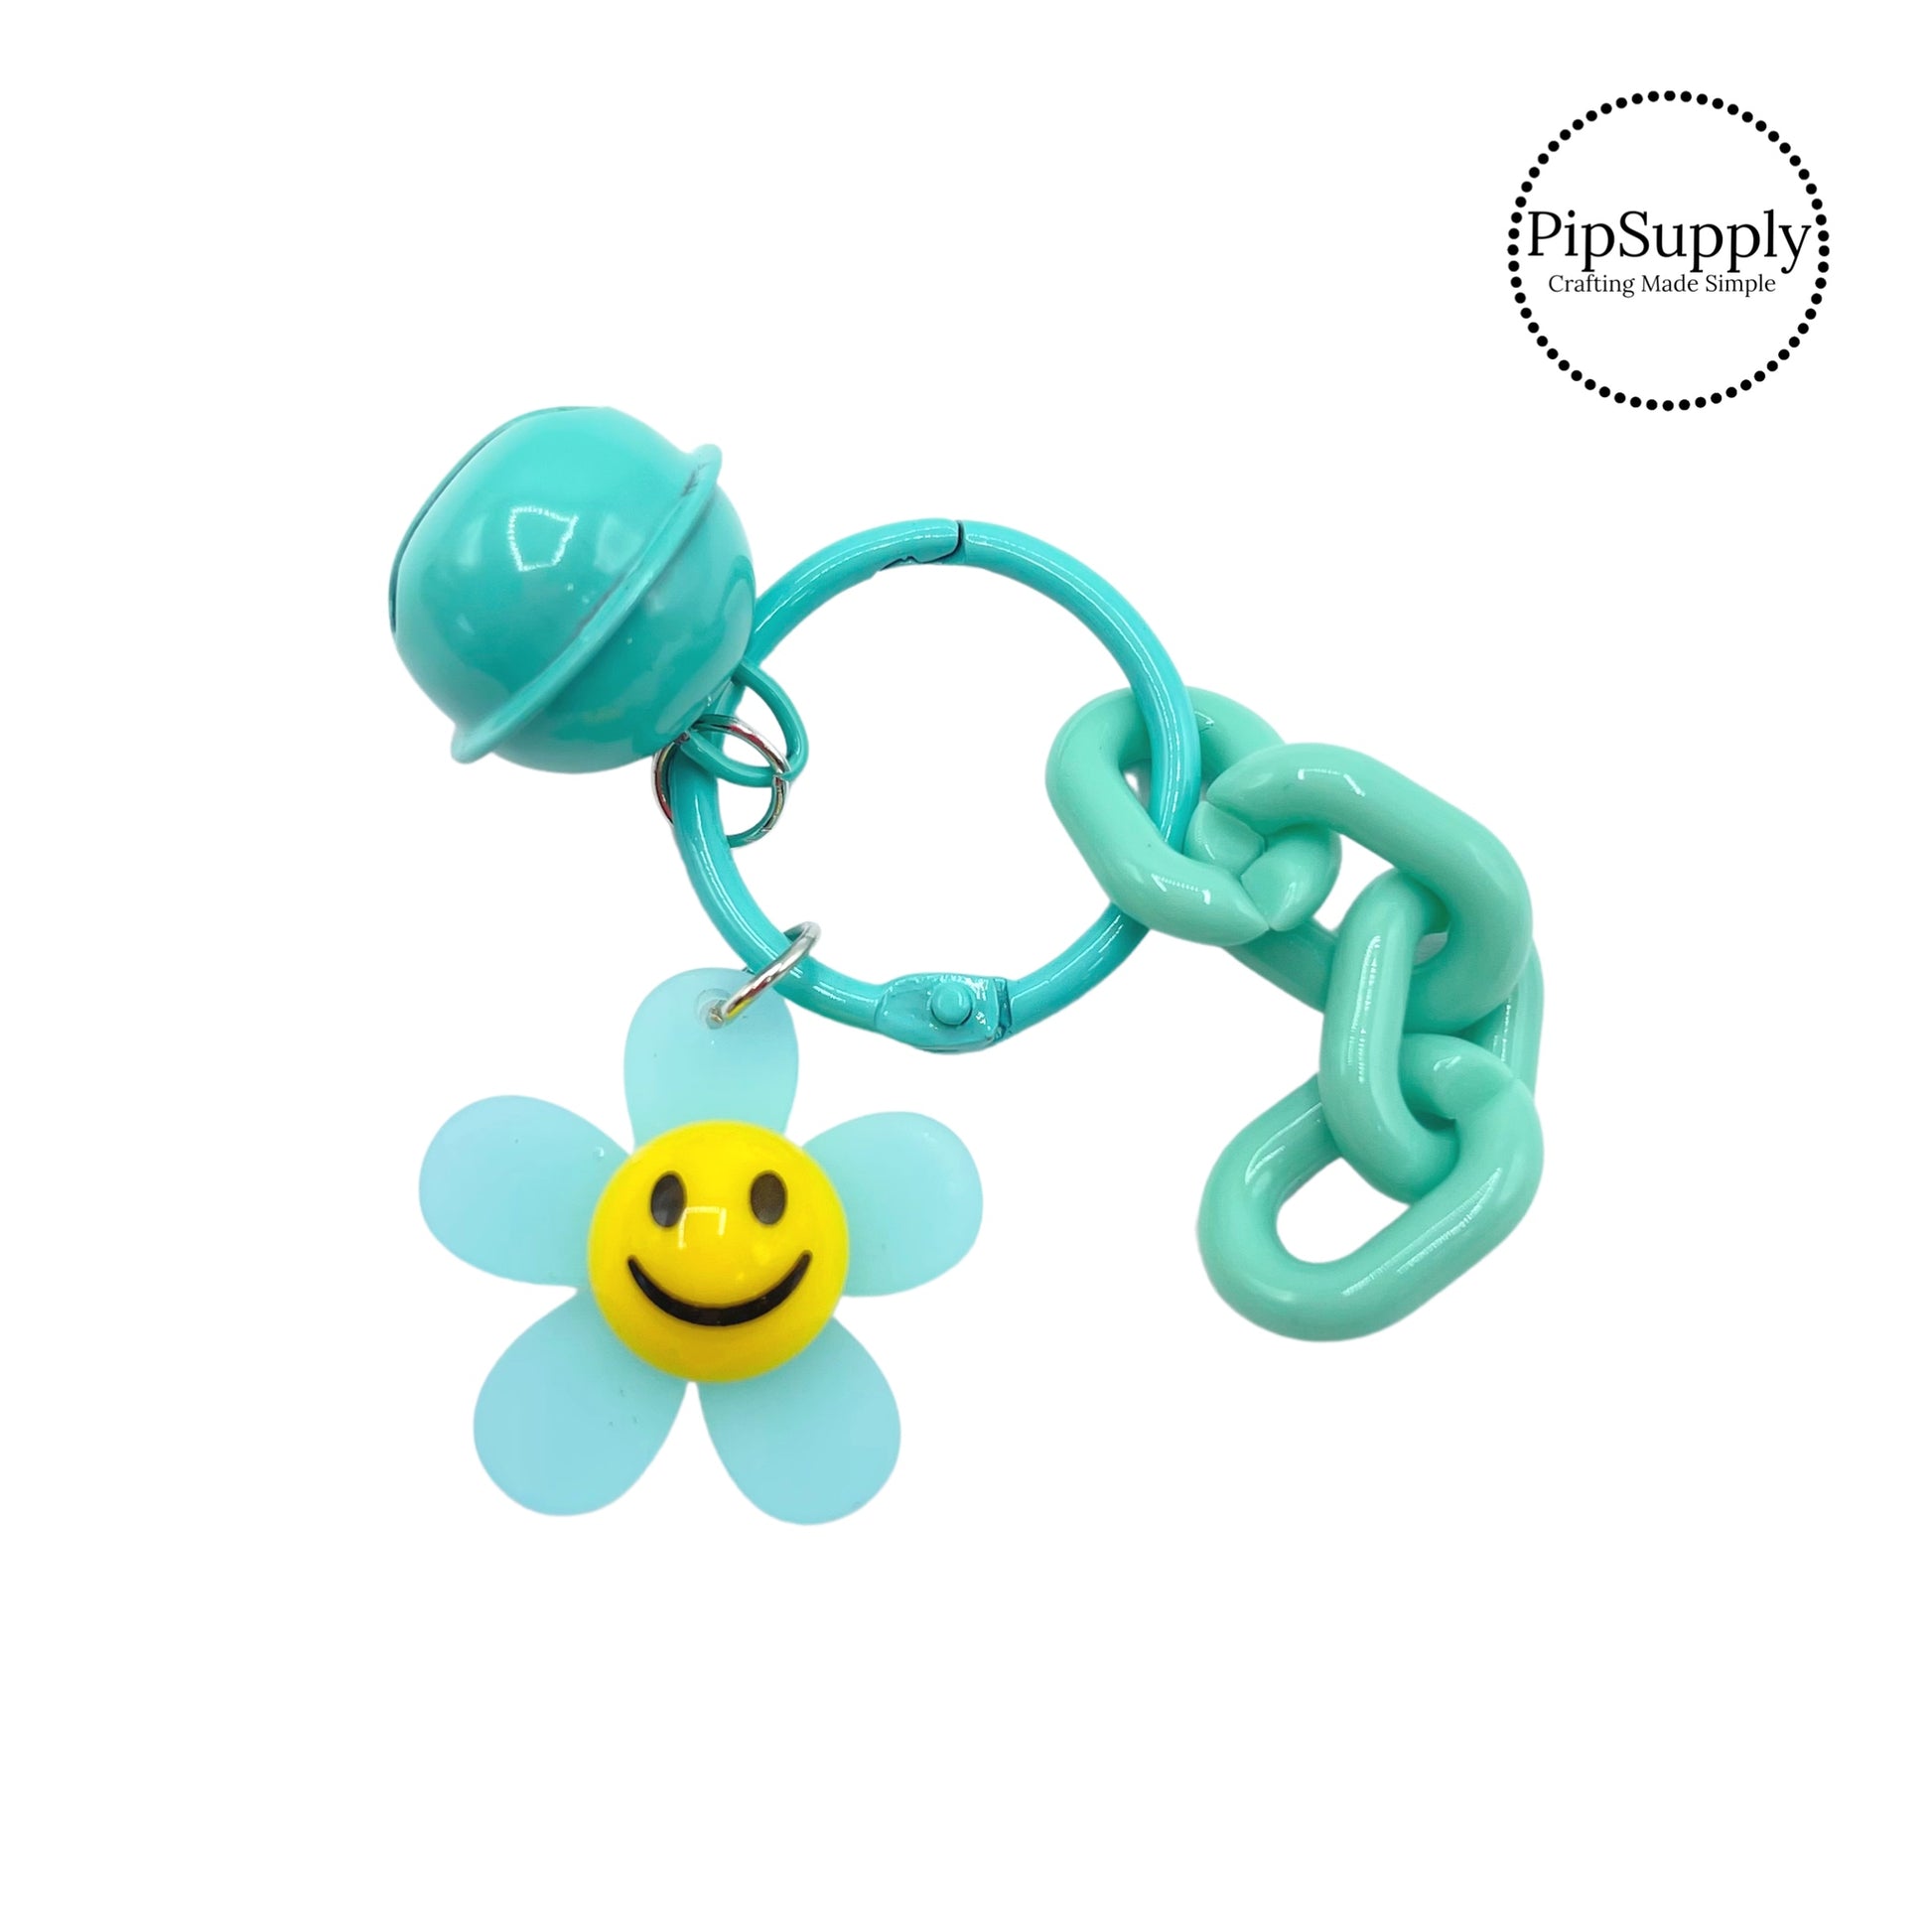 Aqua flower with smiley face and aqua keychain